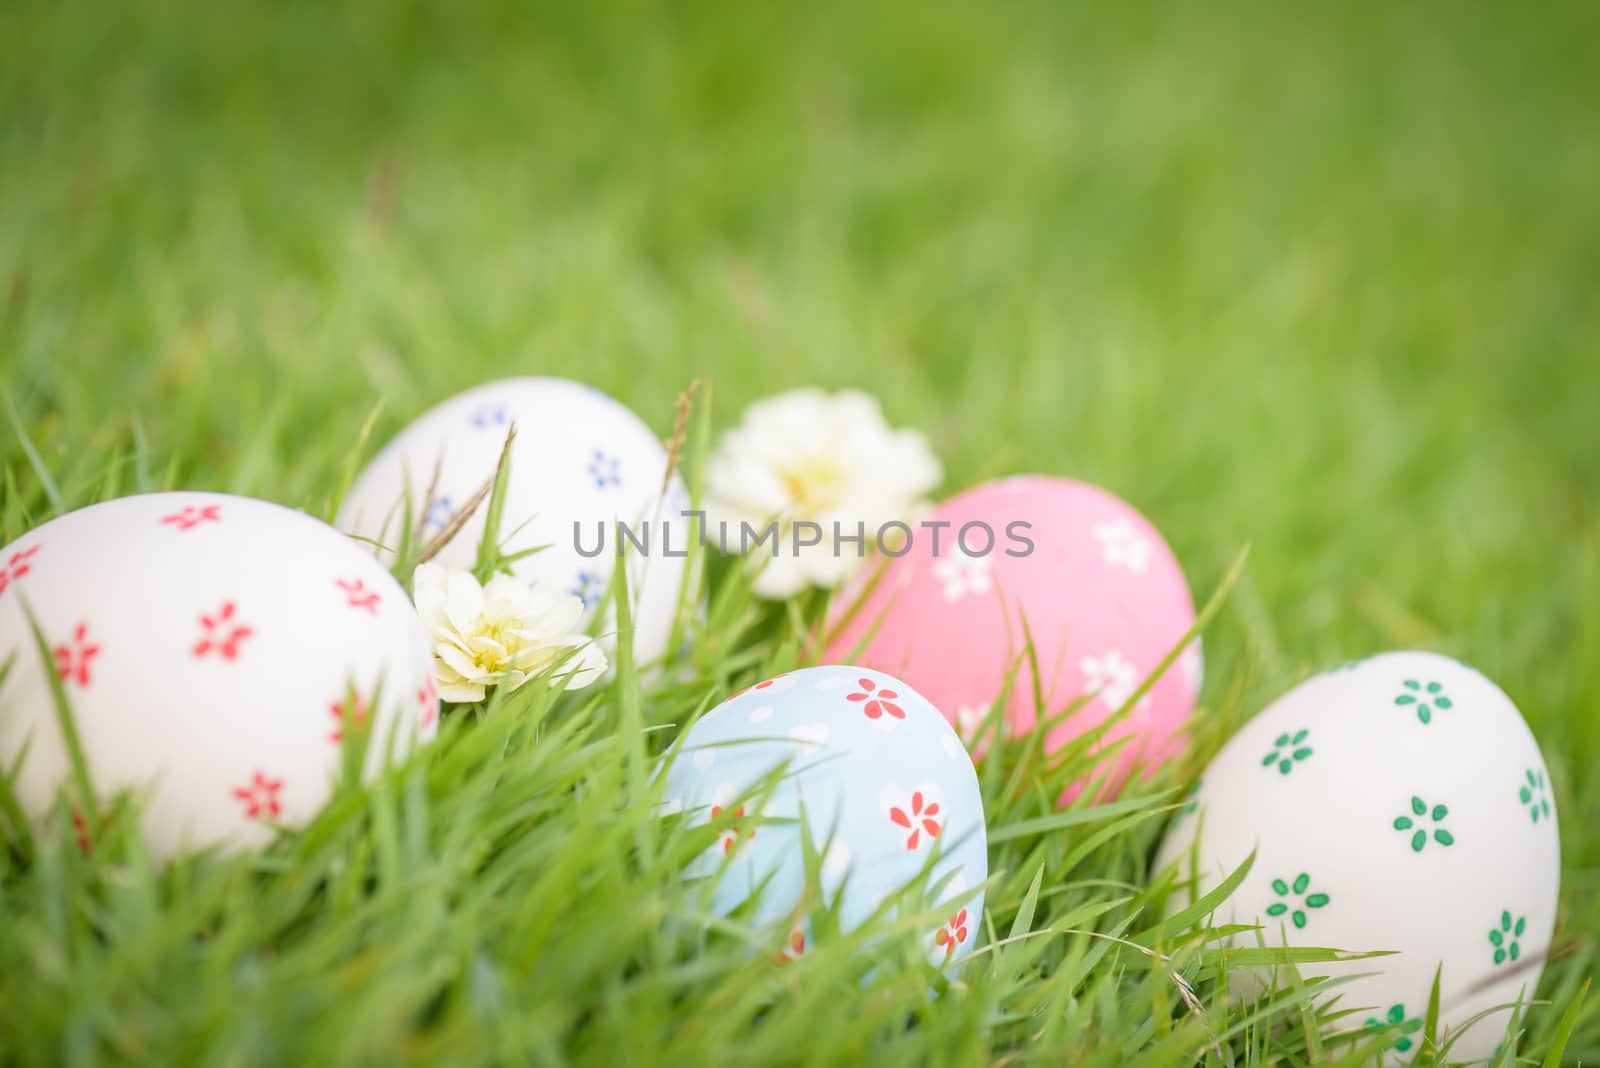 Happy easter!  Closeup Colorful Easter eggs in nest on green grass field during sunset background.